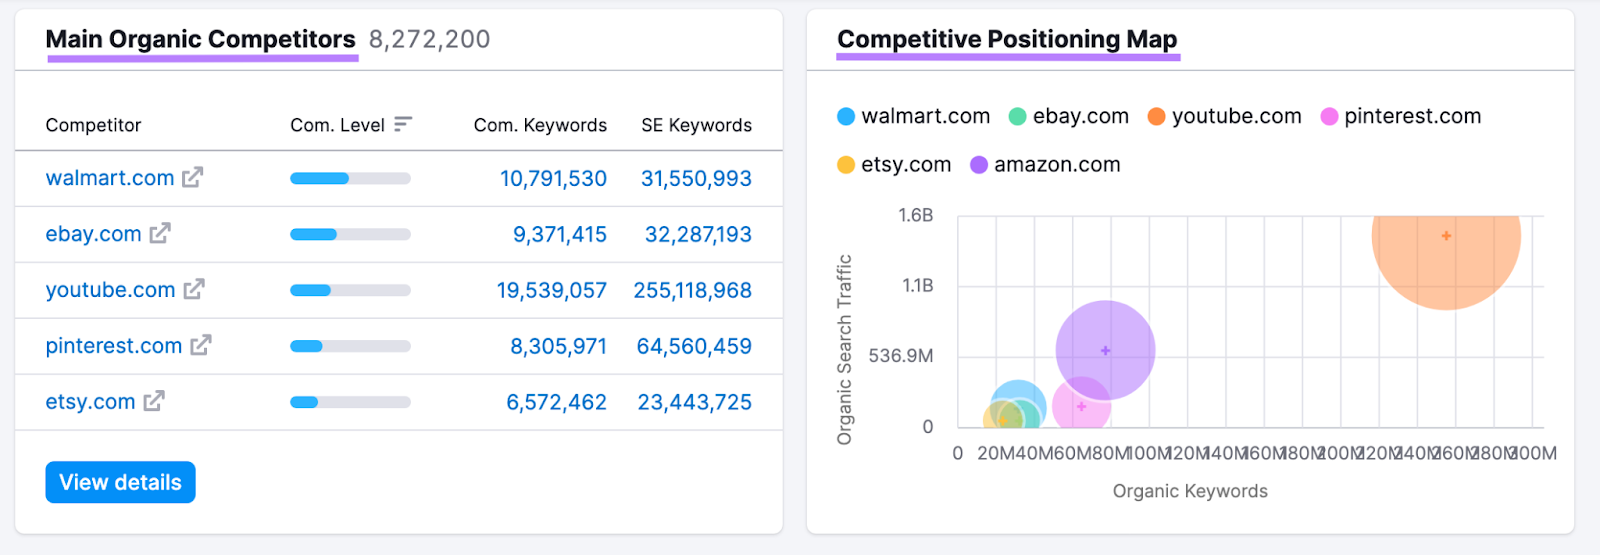 "Main Organic Competitors" and "Competitive Positioning Map" sections for "amazon.com" in Domain Overview